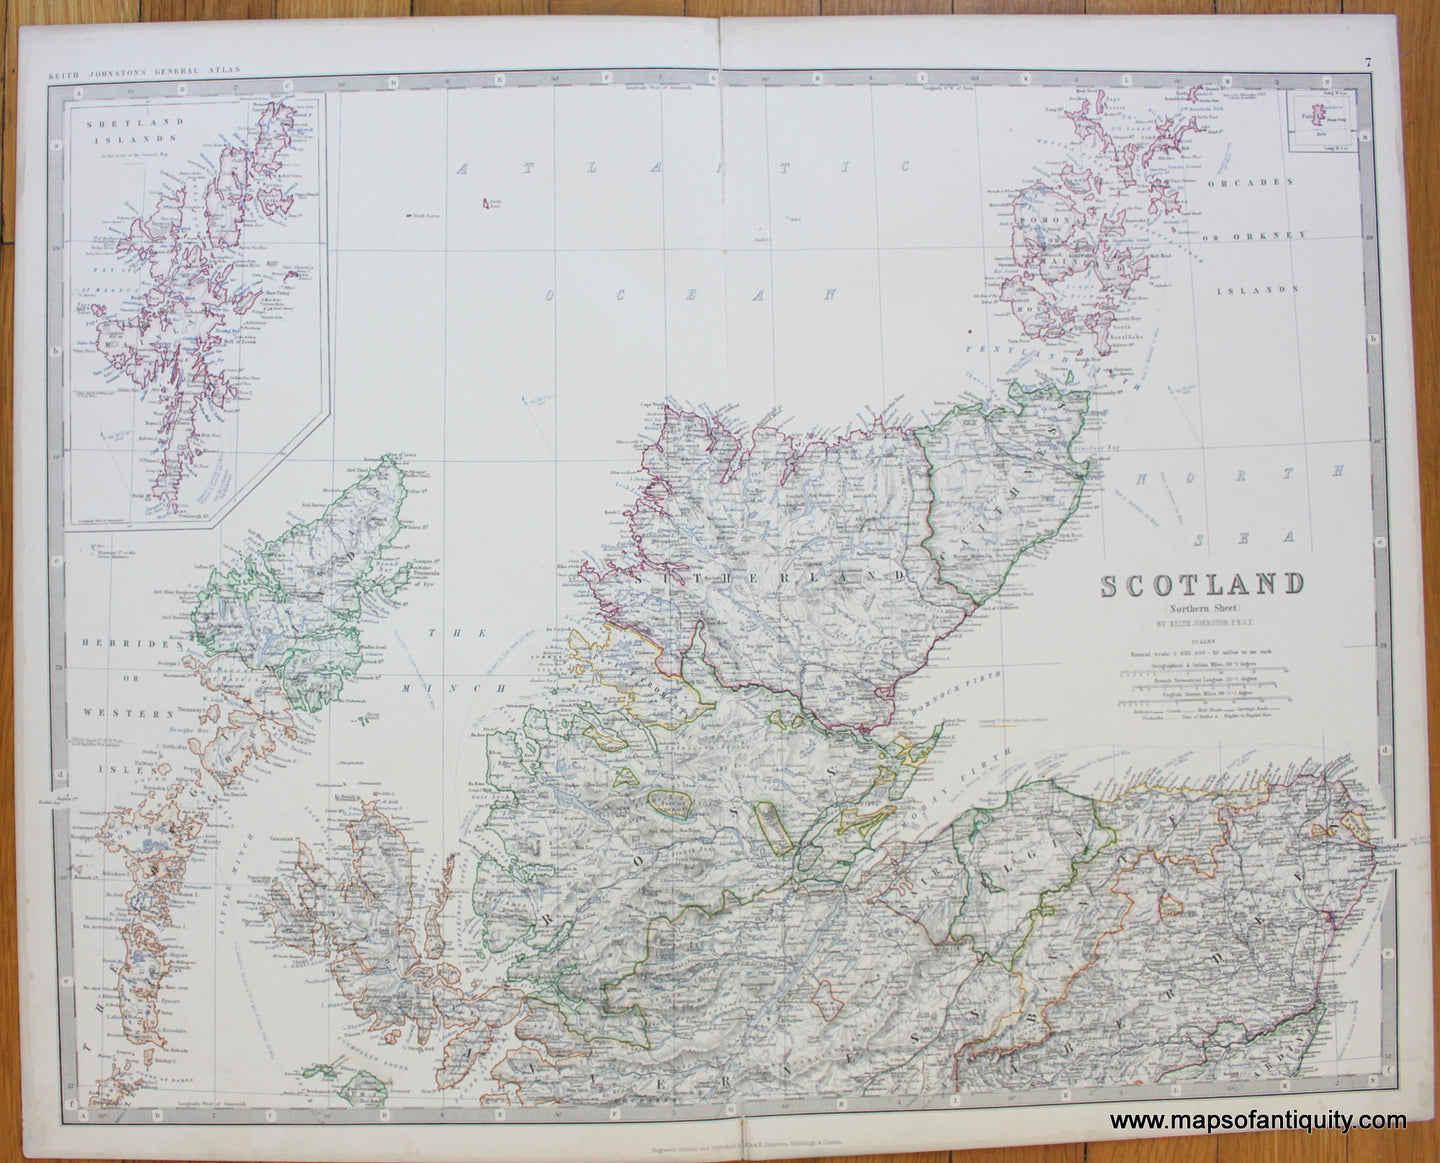 Antique-Printed-Color-Map-Scotland-(Northern-Sheet)-Europe-Scotland-1885-Johnston-Maps-Of-Antiquity